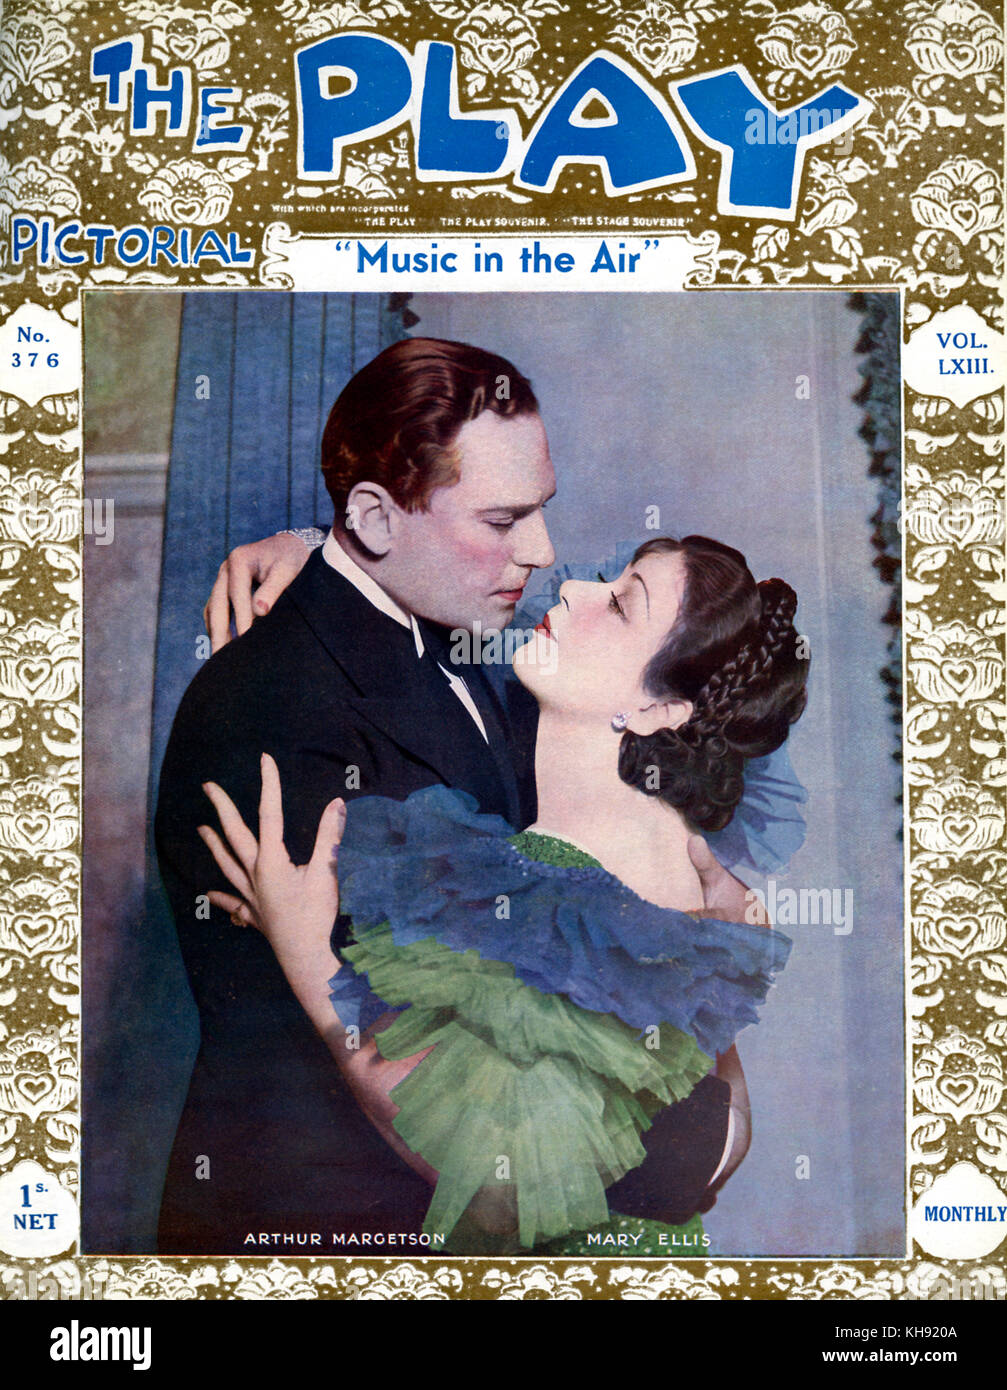 The Play Pictorial  - front cover, No. 376, Vol. LXIII, July 1933. Arthur Margetson and Mary Ellis in 'Music in the Air' -  musical written by Oscar Hammerstein II (lyrics and book) and Jerome Kern (music). Stock Photo